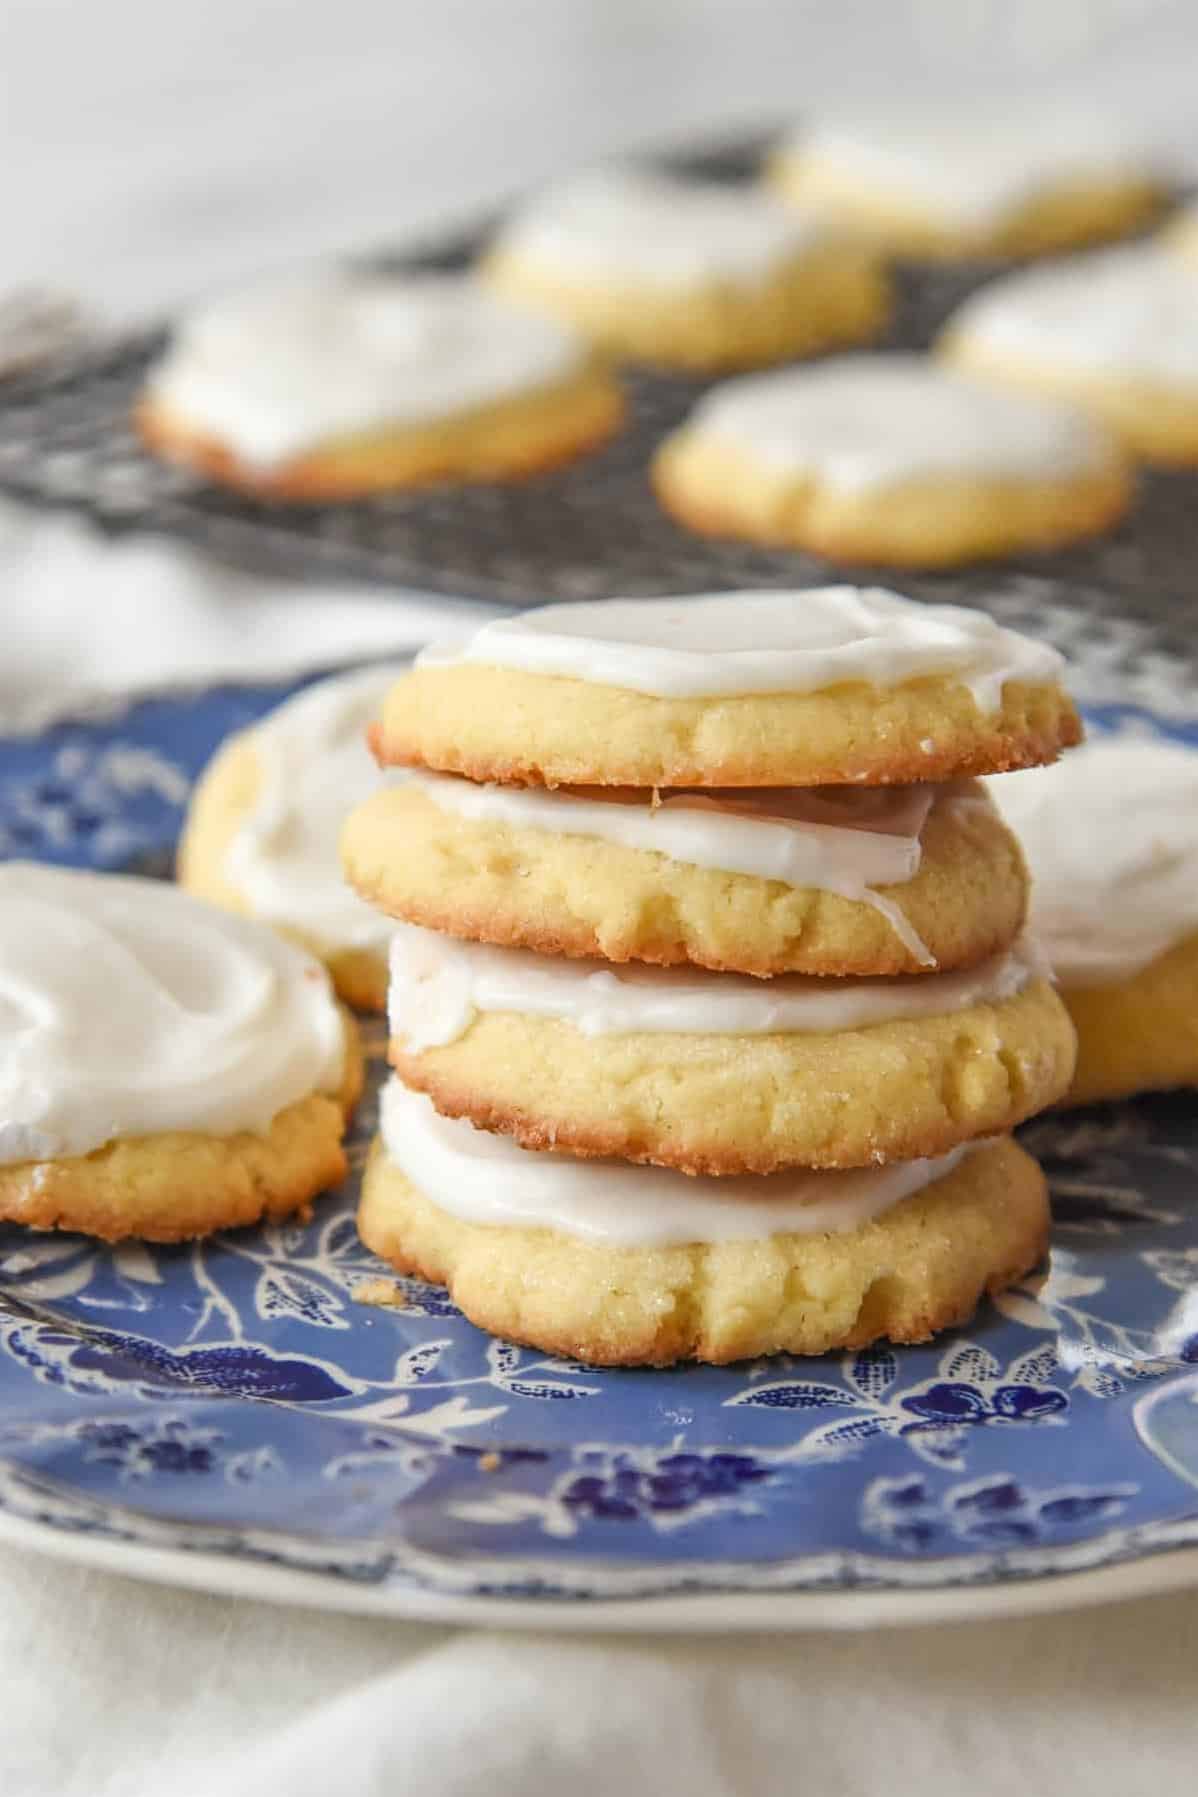  Sweet and nutty, these cookies are a delight to the senses.